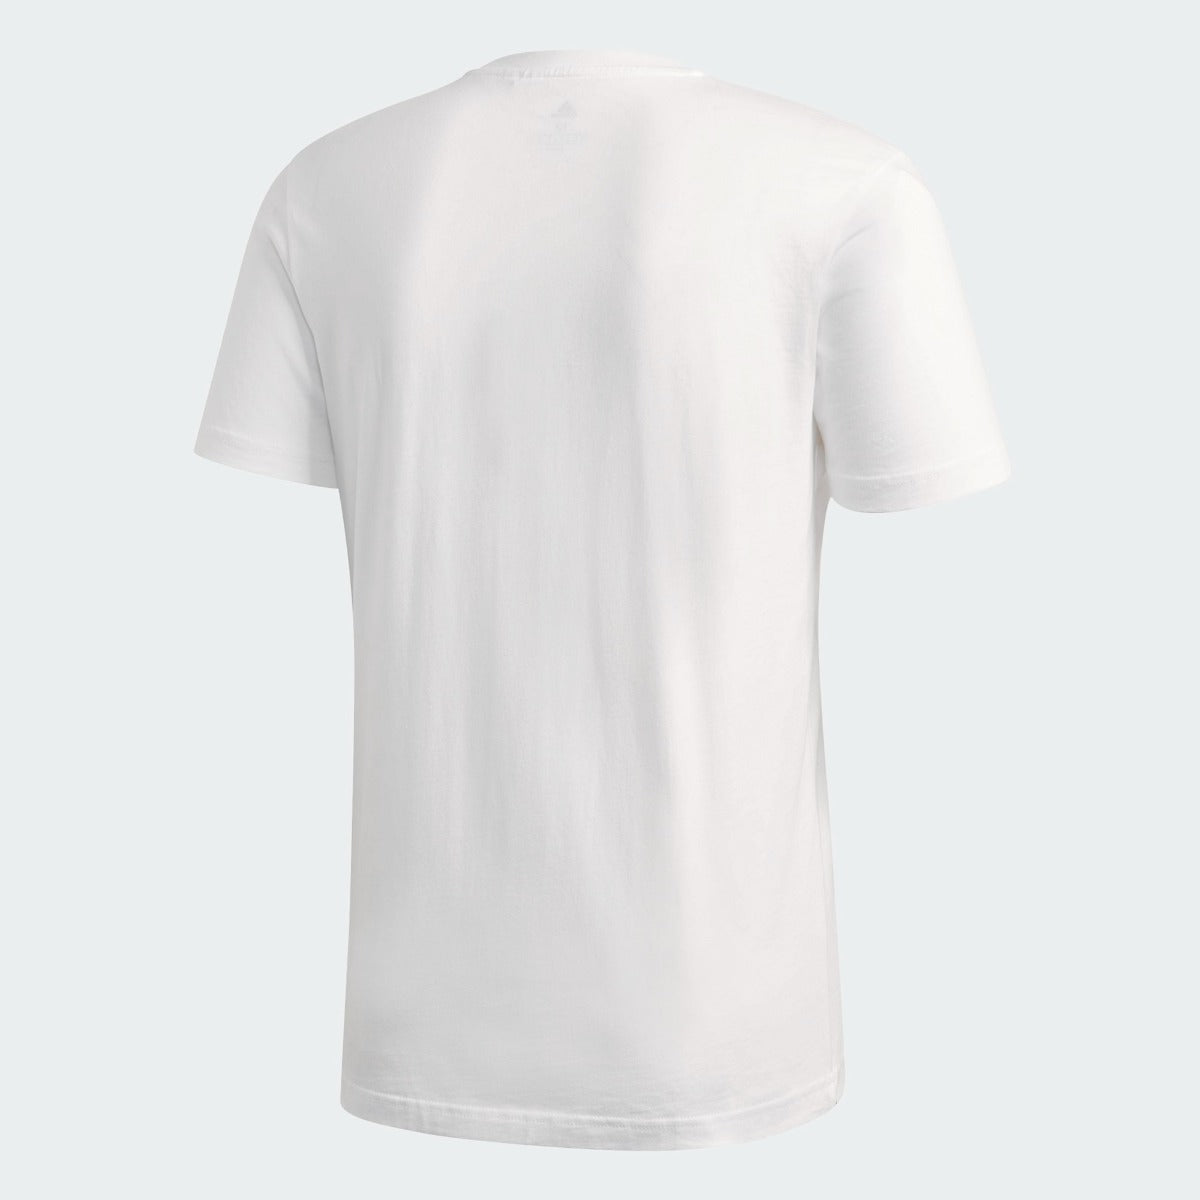 Adidas 2020-21 Real Madrid DNA Graphic Tee - White-Navy